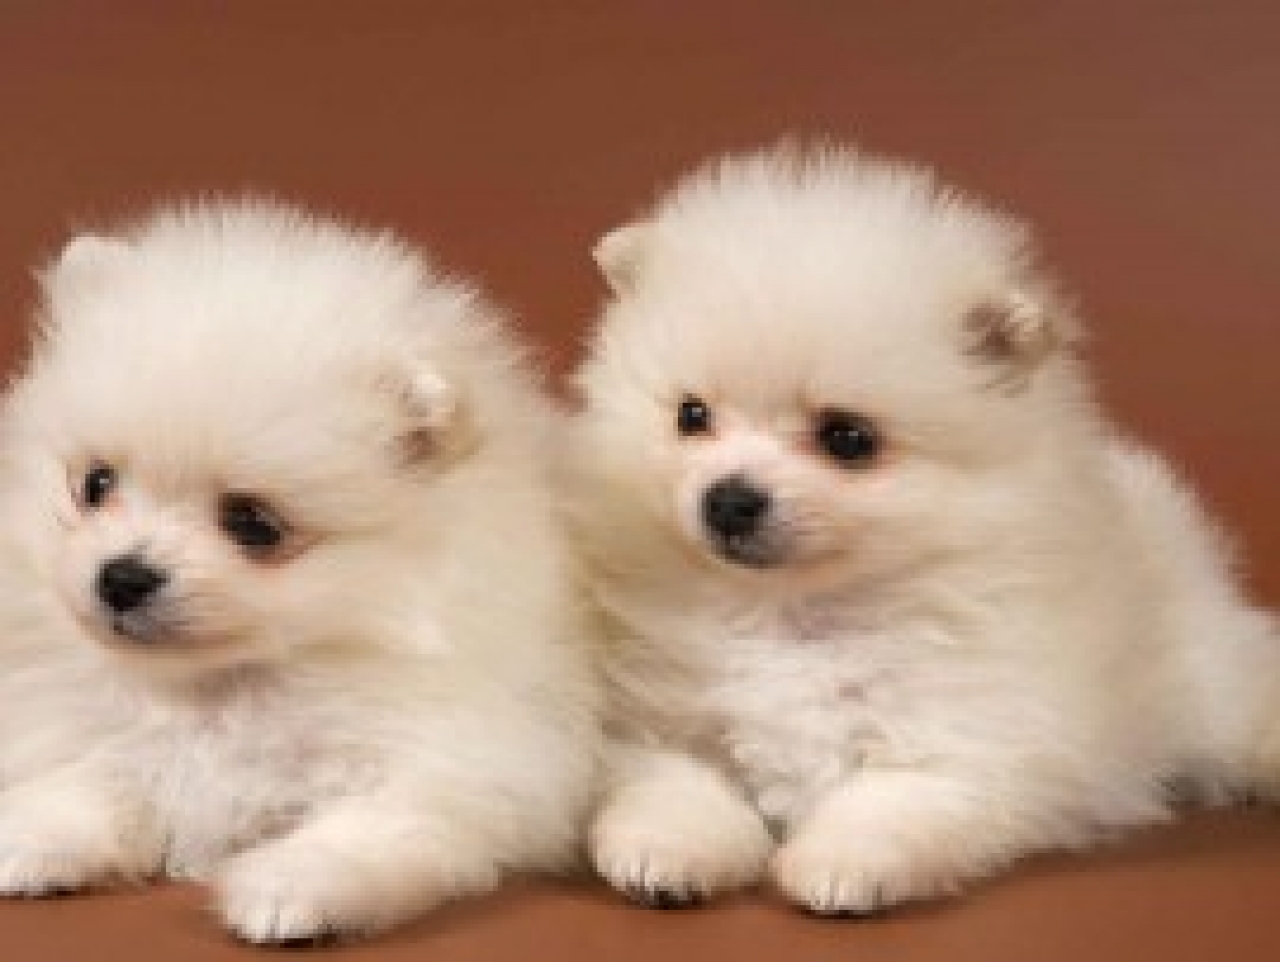 Get Cute Puppies Wallpaper And Make Your Desktop Cool